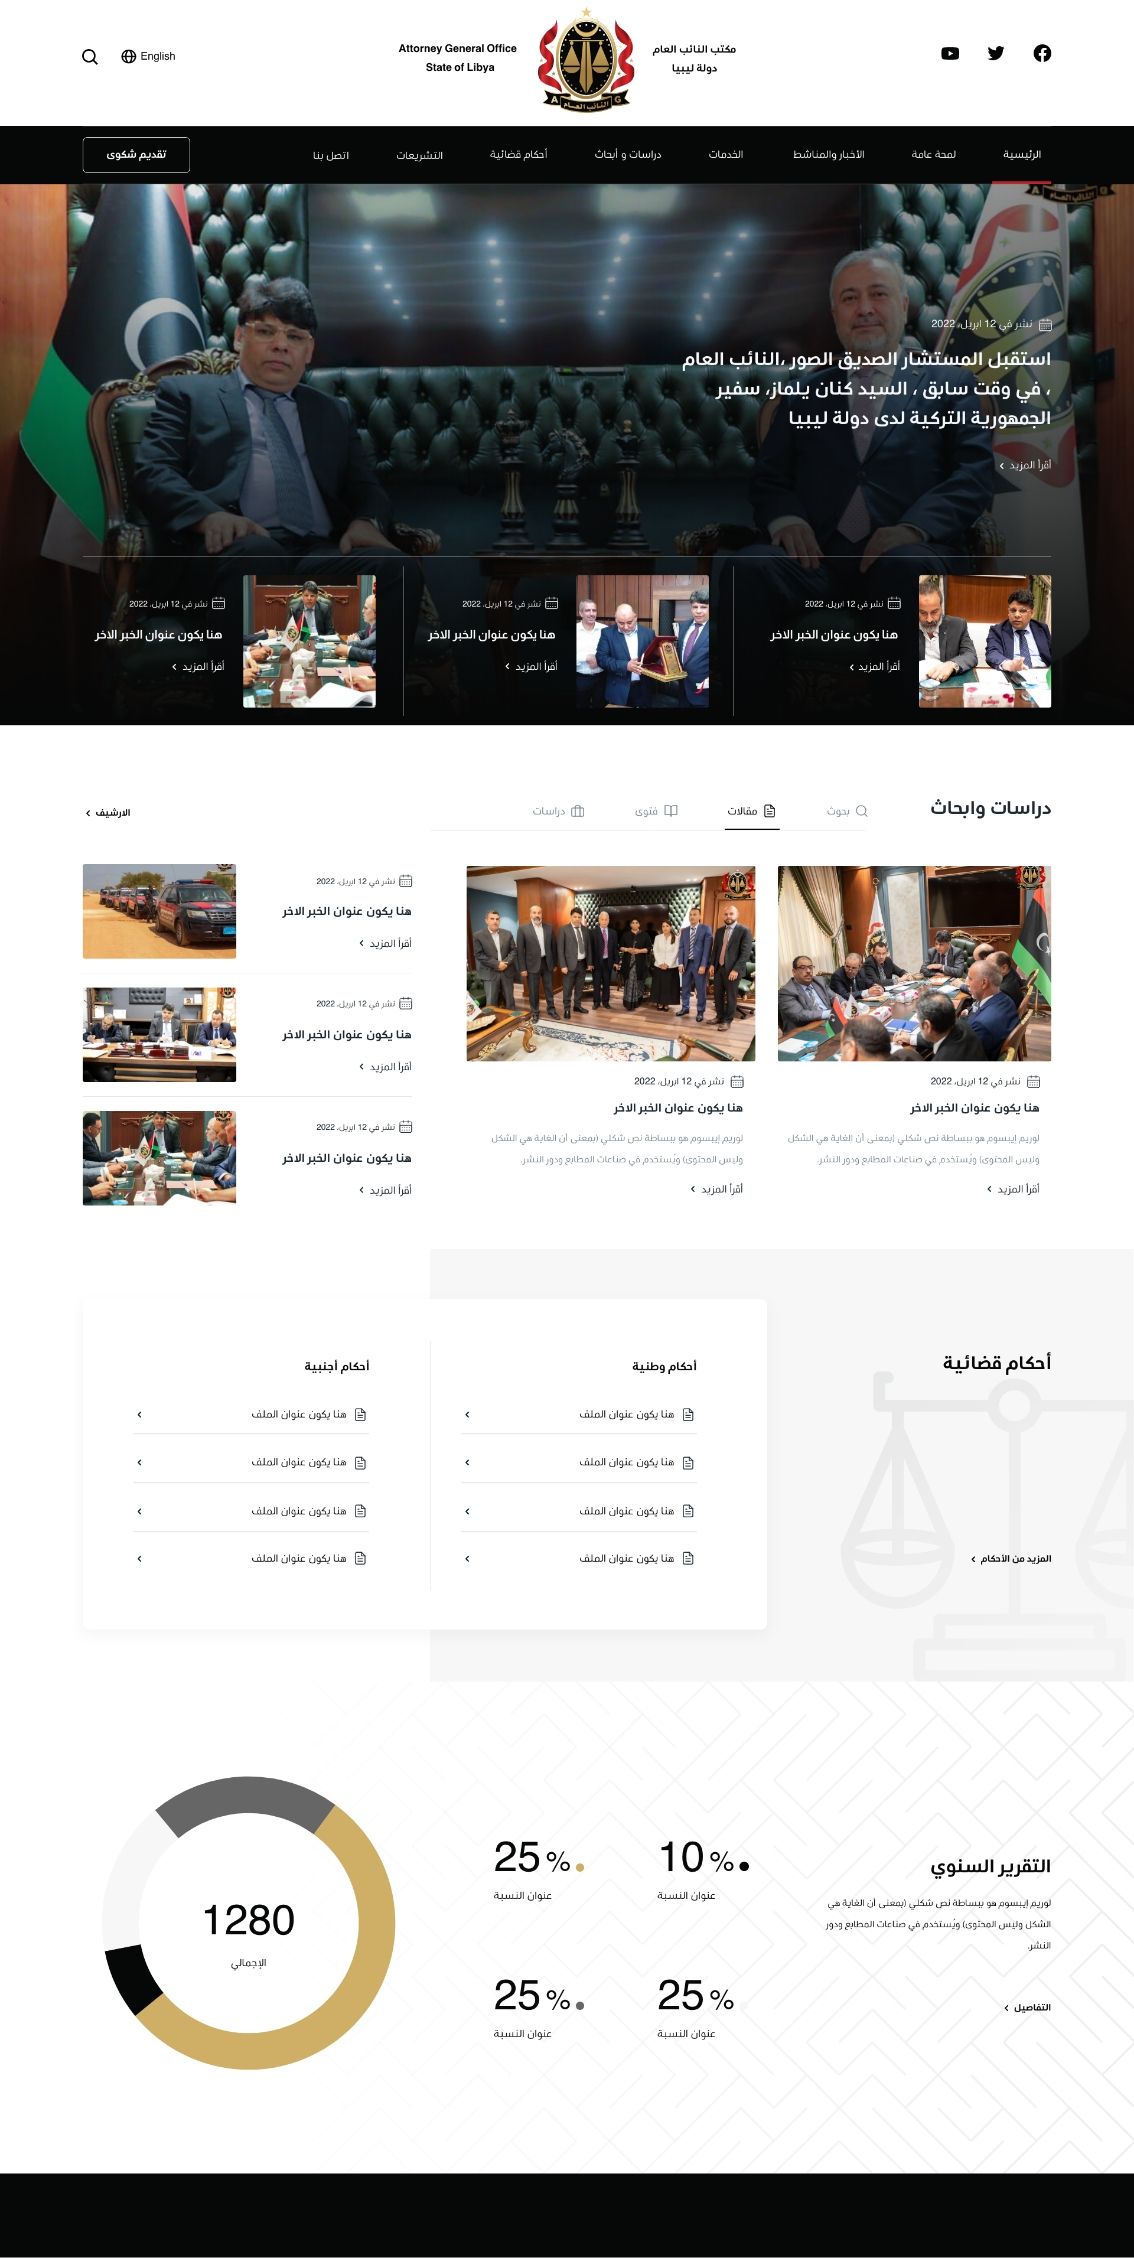 Attorney General Office web